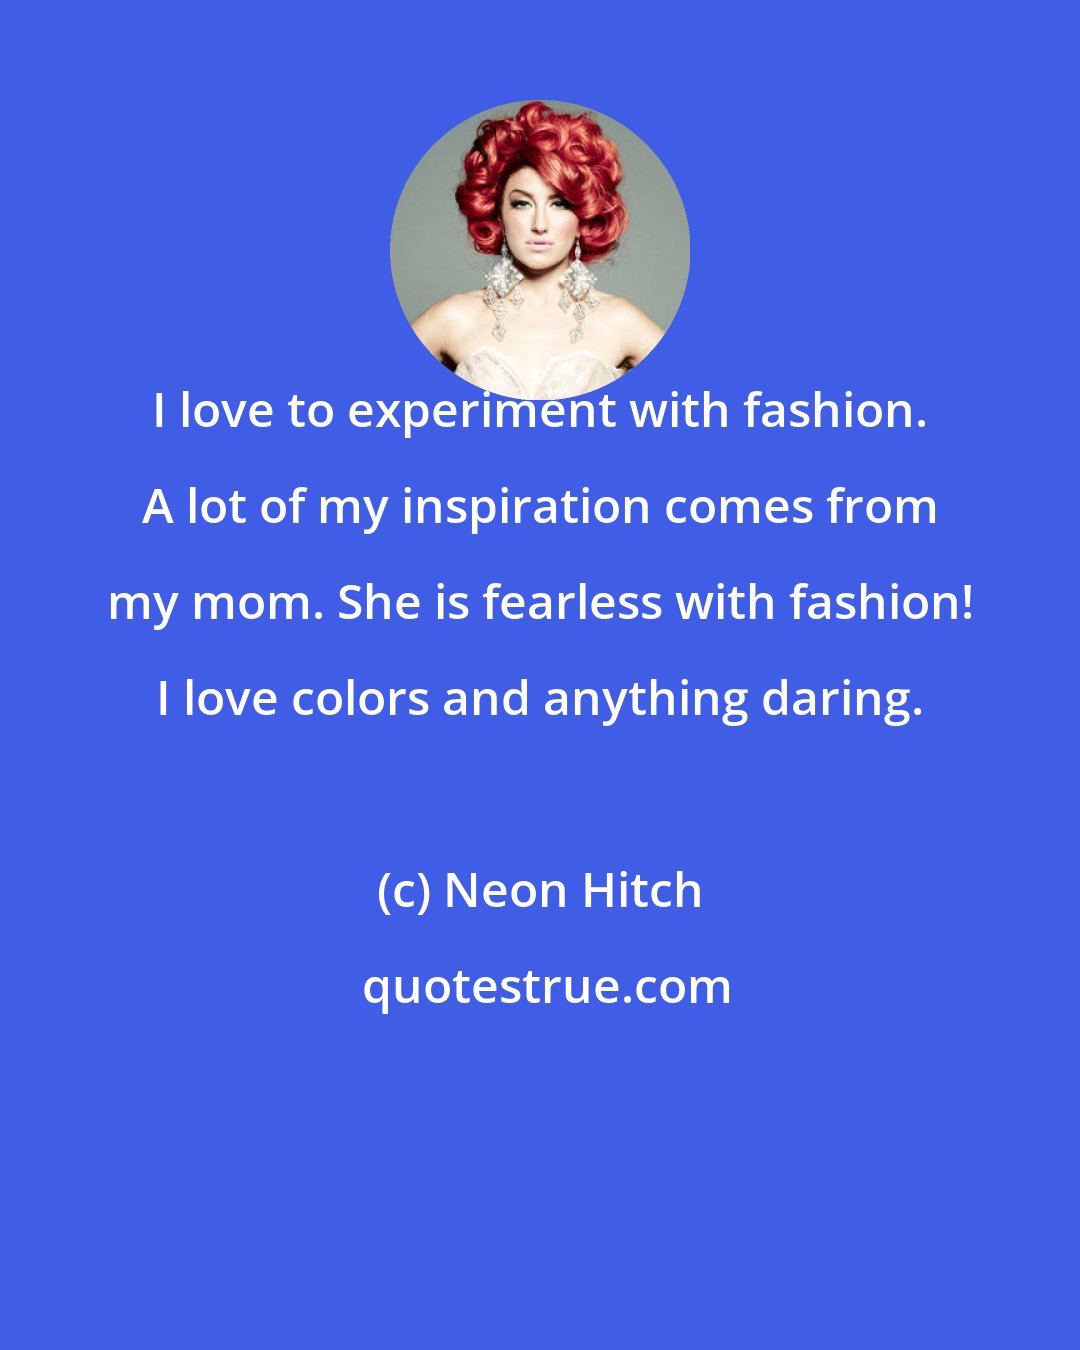 Neon Hitch: I love to experiment with fashion. A lot of my inspiration comes from my mom. She is fearless with fashion! I love colors and anything daring.